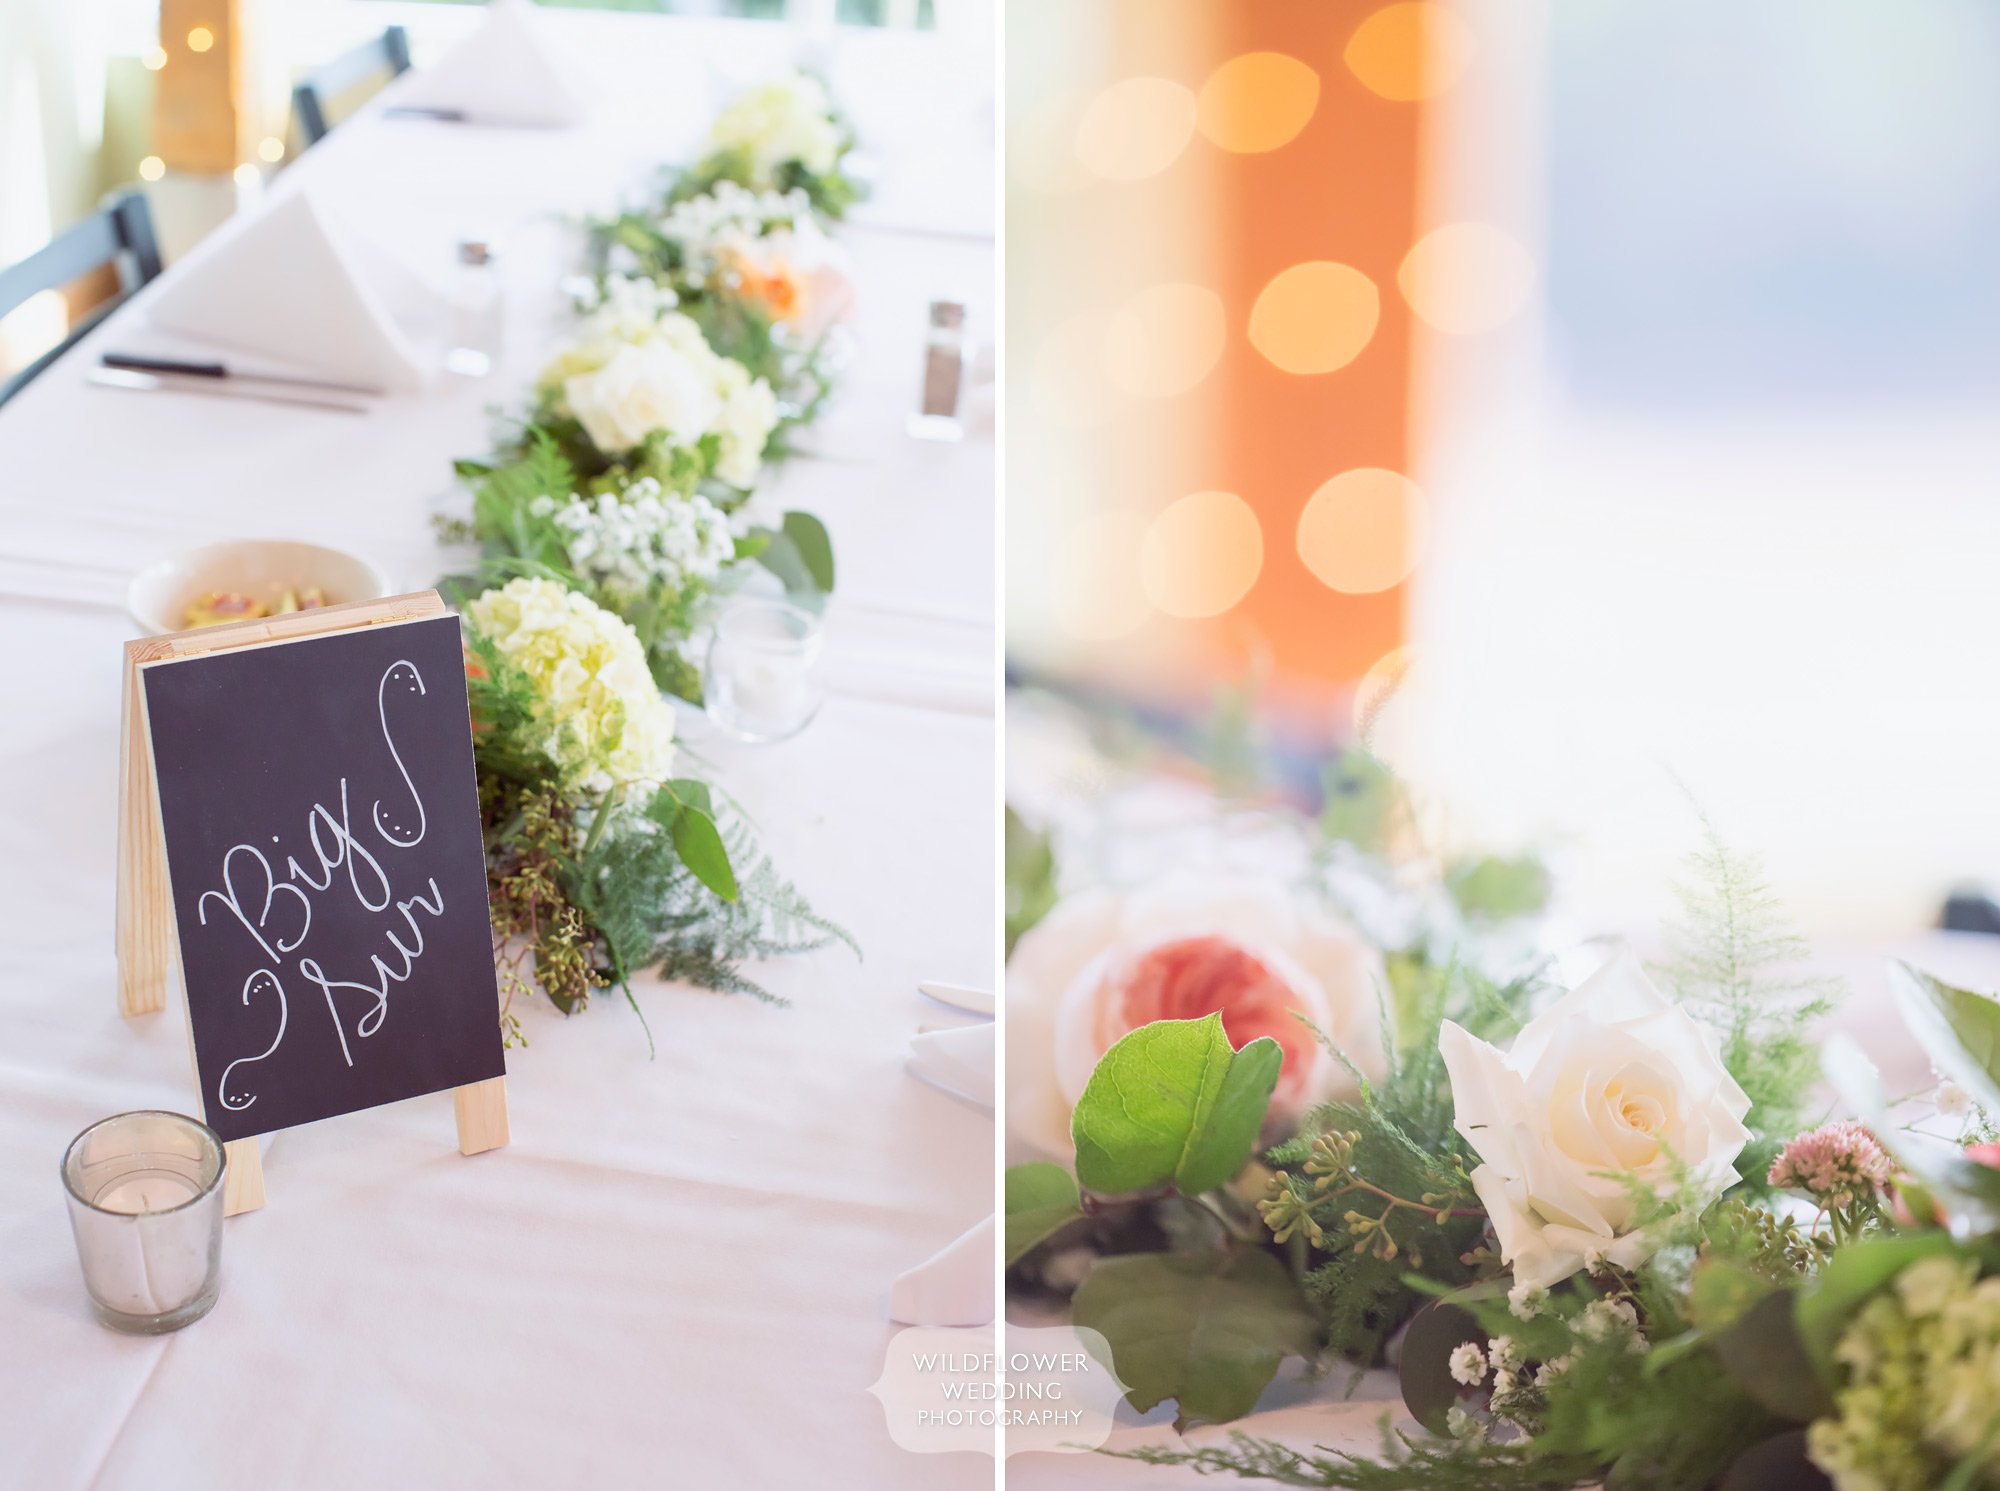 Rustic chic table decor ideas for this summer wedding at Les Bourgeois in Rocheport, MO.